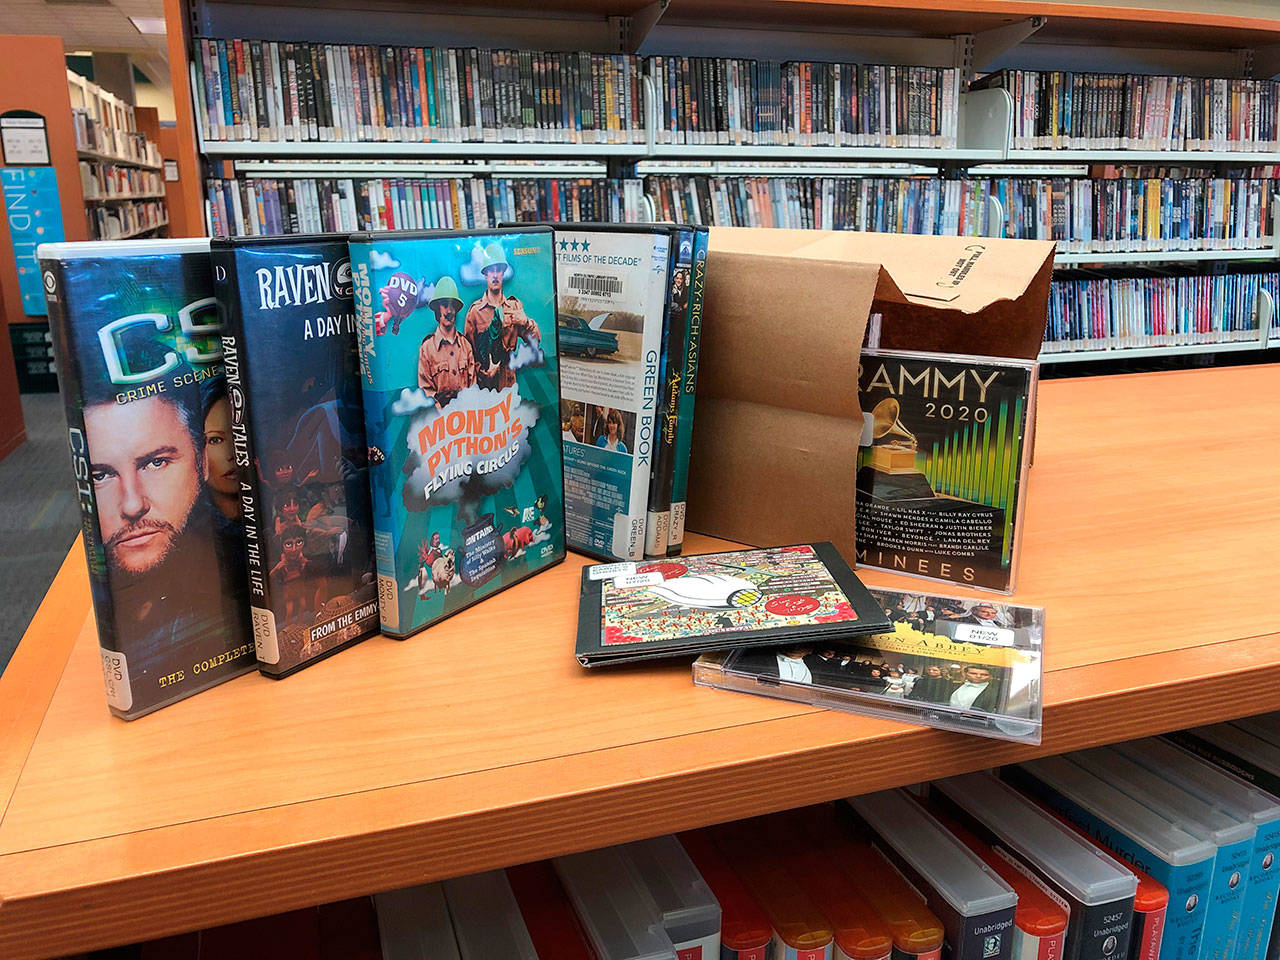 Peninsula libraries now offer DVDs and music CDs through its Grab Bag program available at each North Olympic Library System branch. Photo courtesy of North Olympic Library System